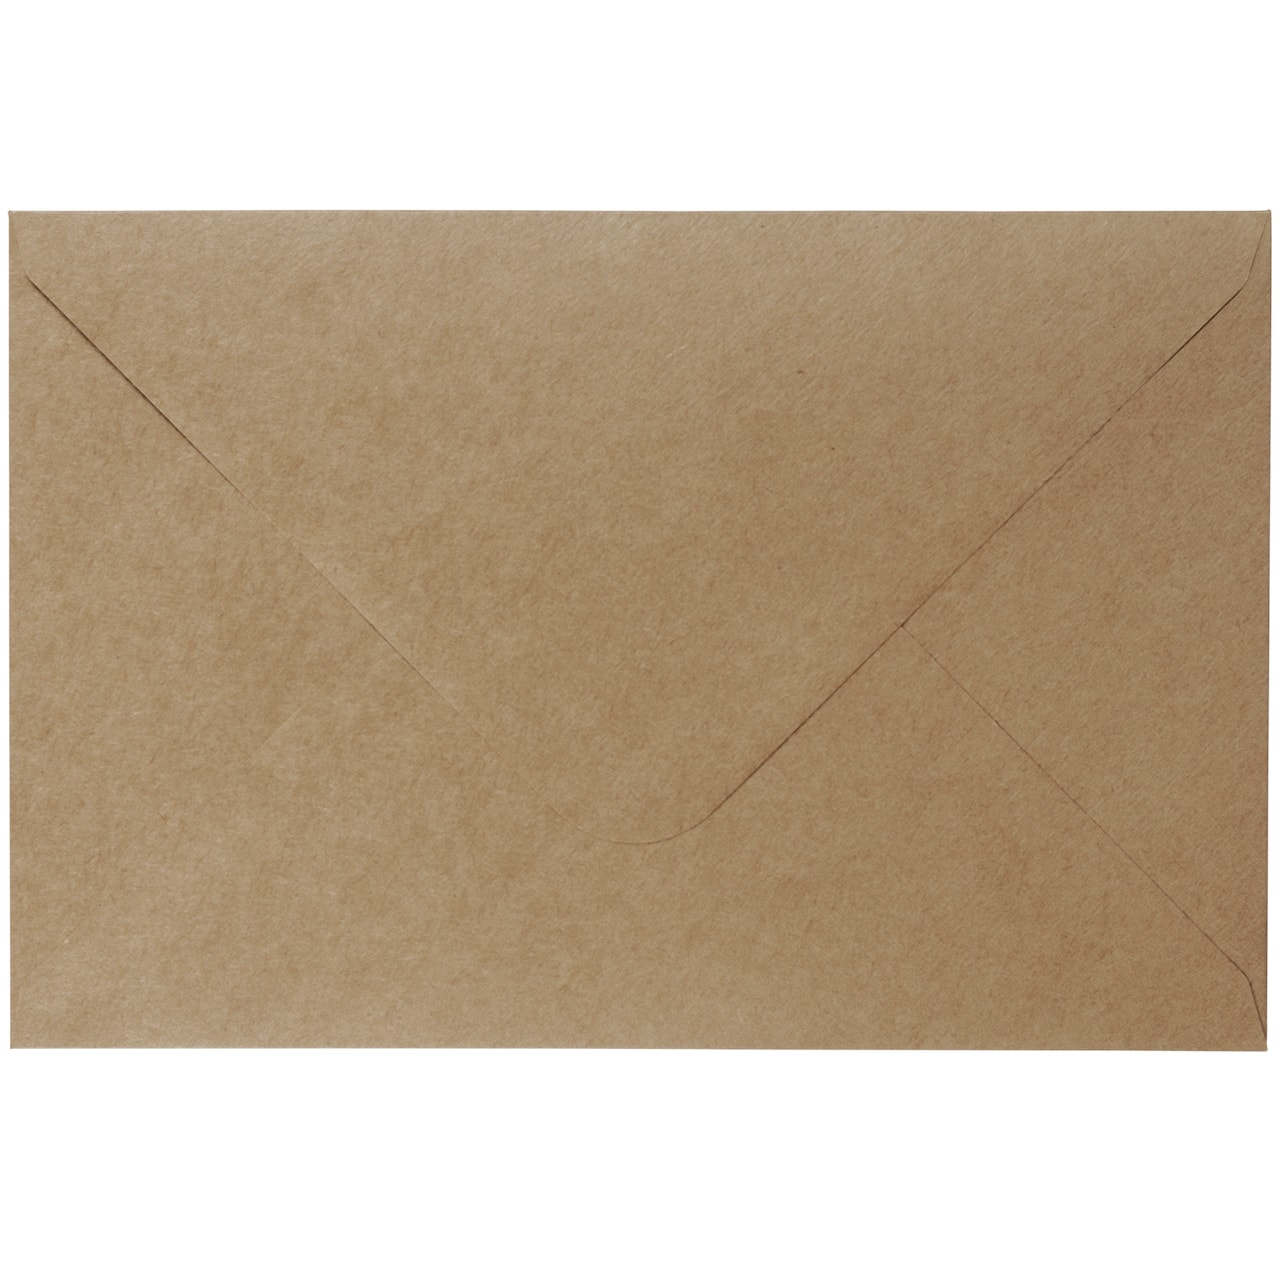 Kraft Paper Envelopes by Recollections™, 6